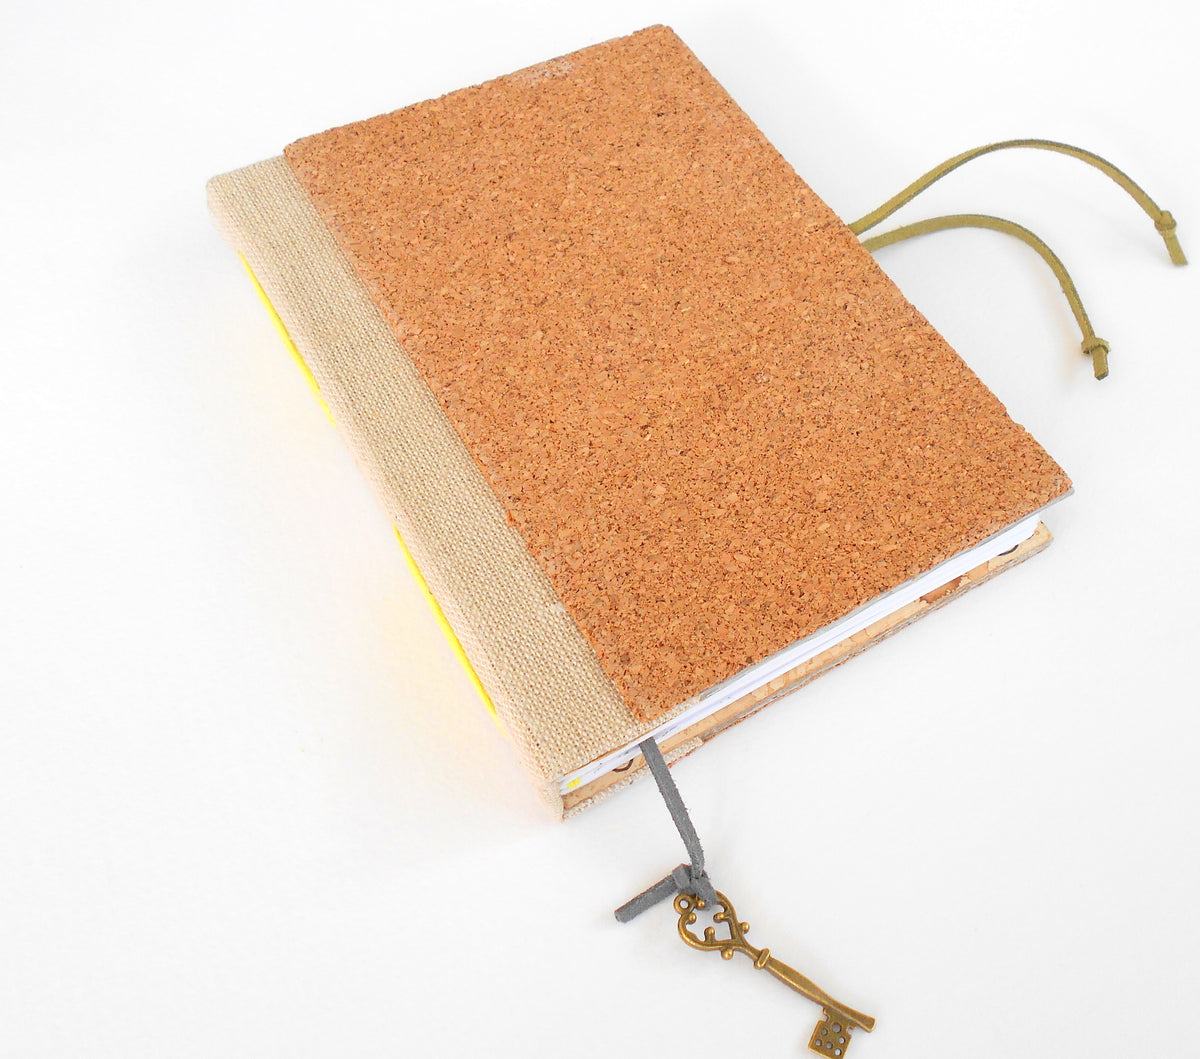 Handmade travel journal with hard cork covers- custom color binding- Eco friendly coptic journal- 100% recycled pages- Burlap rustic travel journal